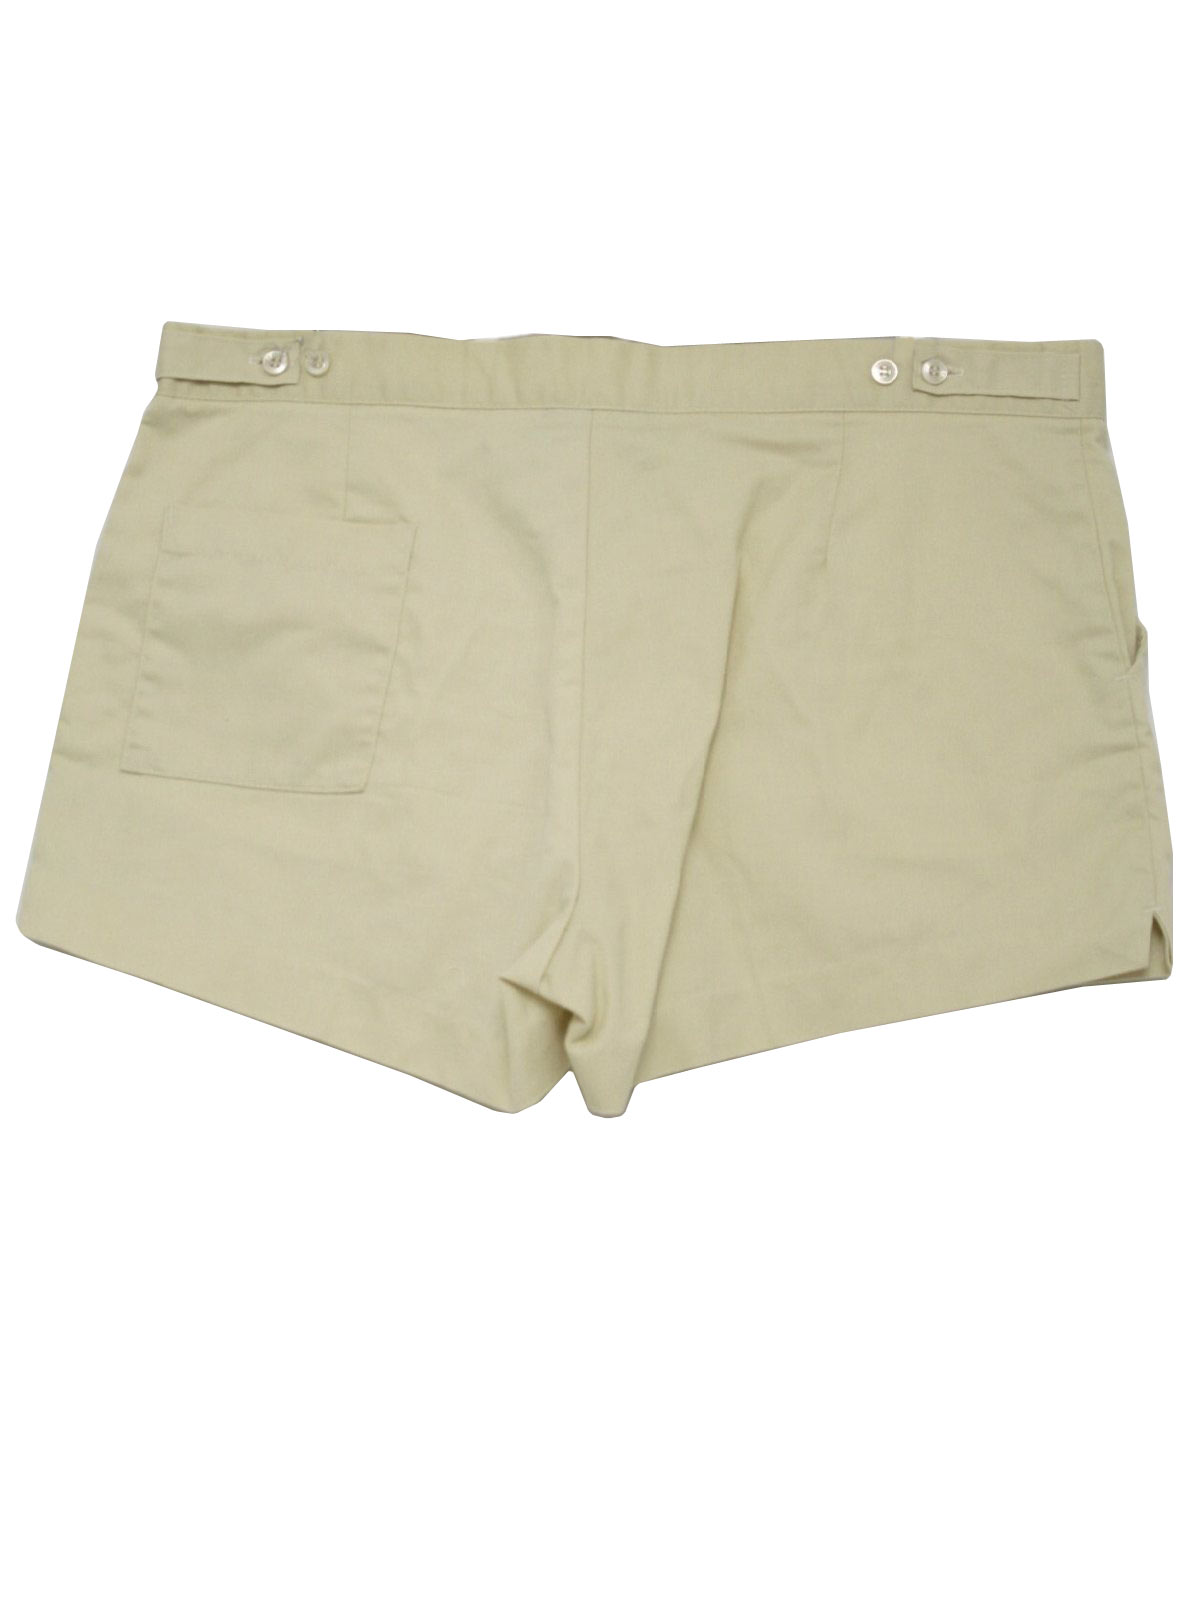 Vintage Fred Perry Sportswear Eighties Shorts: 80s -Fred Perry ...